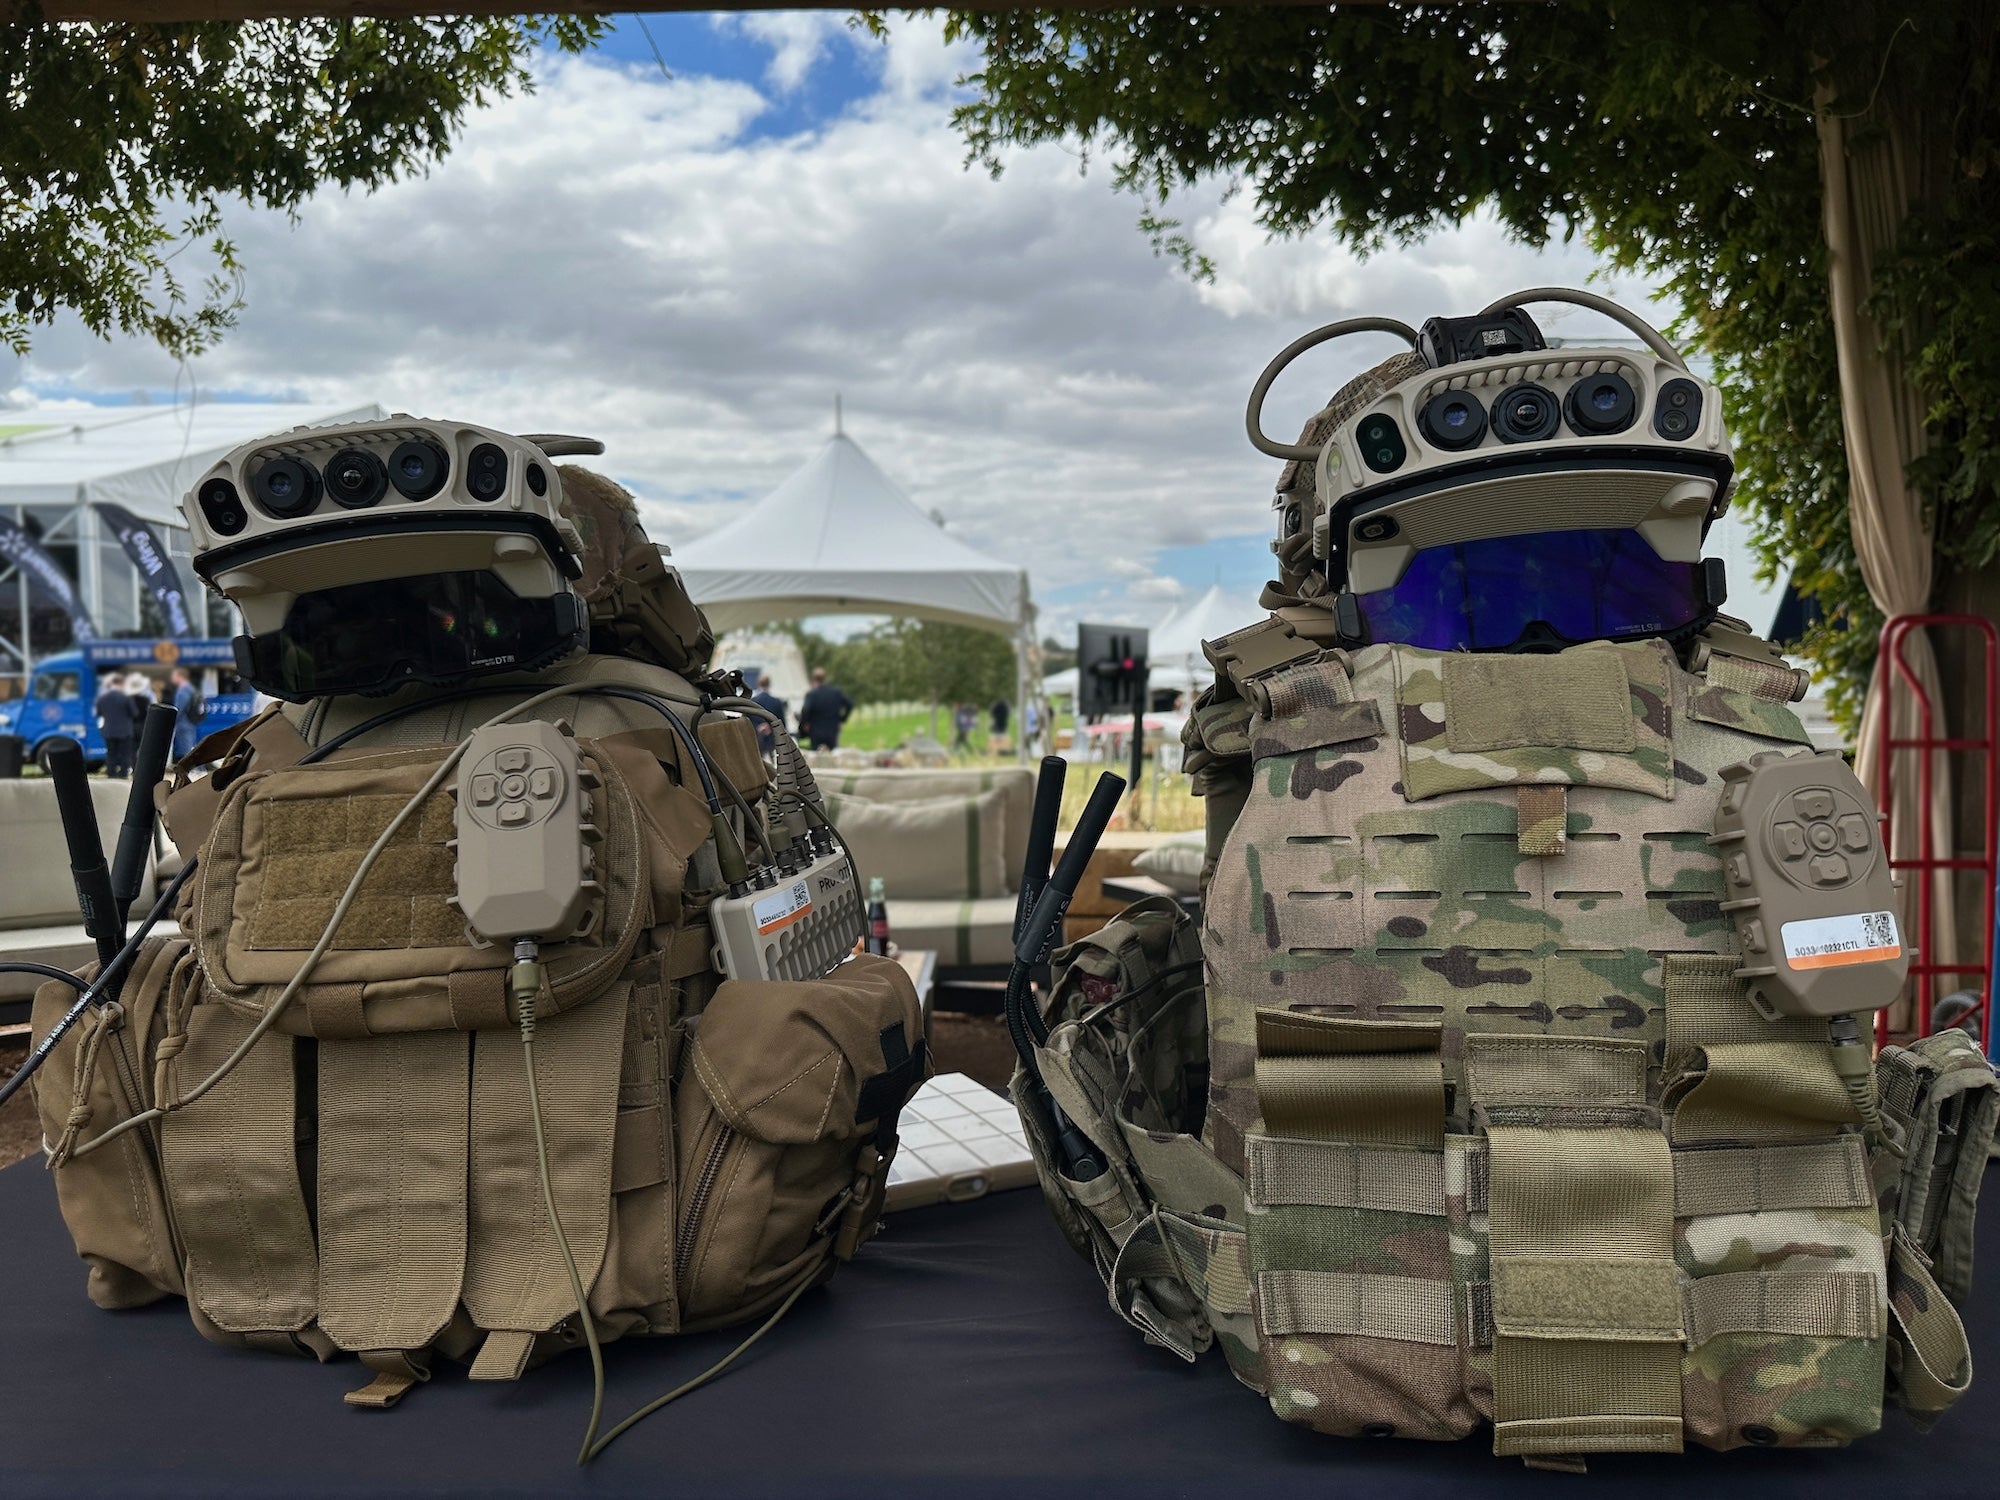 The goggle-like pieces of gear on top of the backpacks are the latest iteration—version 1.2—of the Army’s IVAS (Integrated Visual Augmentation System), which has been a challenging technology to get right and has a history of causing issues like nausea. The goal is to give a soldier a head-up display that can show a compass heading, map, or other information right in front of their eyes. Think of them as augmented reality goggles for soldiers that continue to be a work in progress; they’re made by Microsoft. 